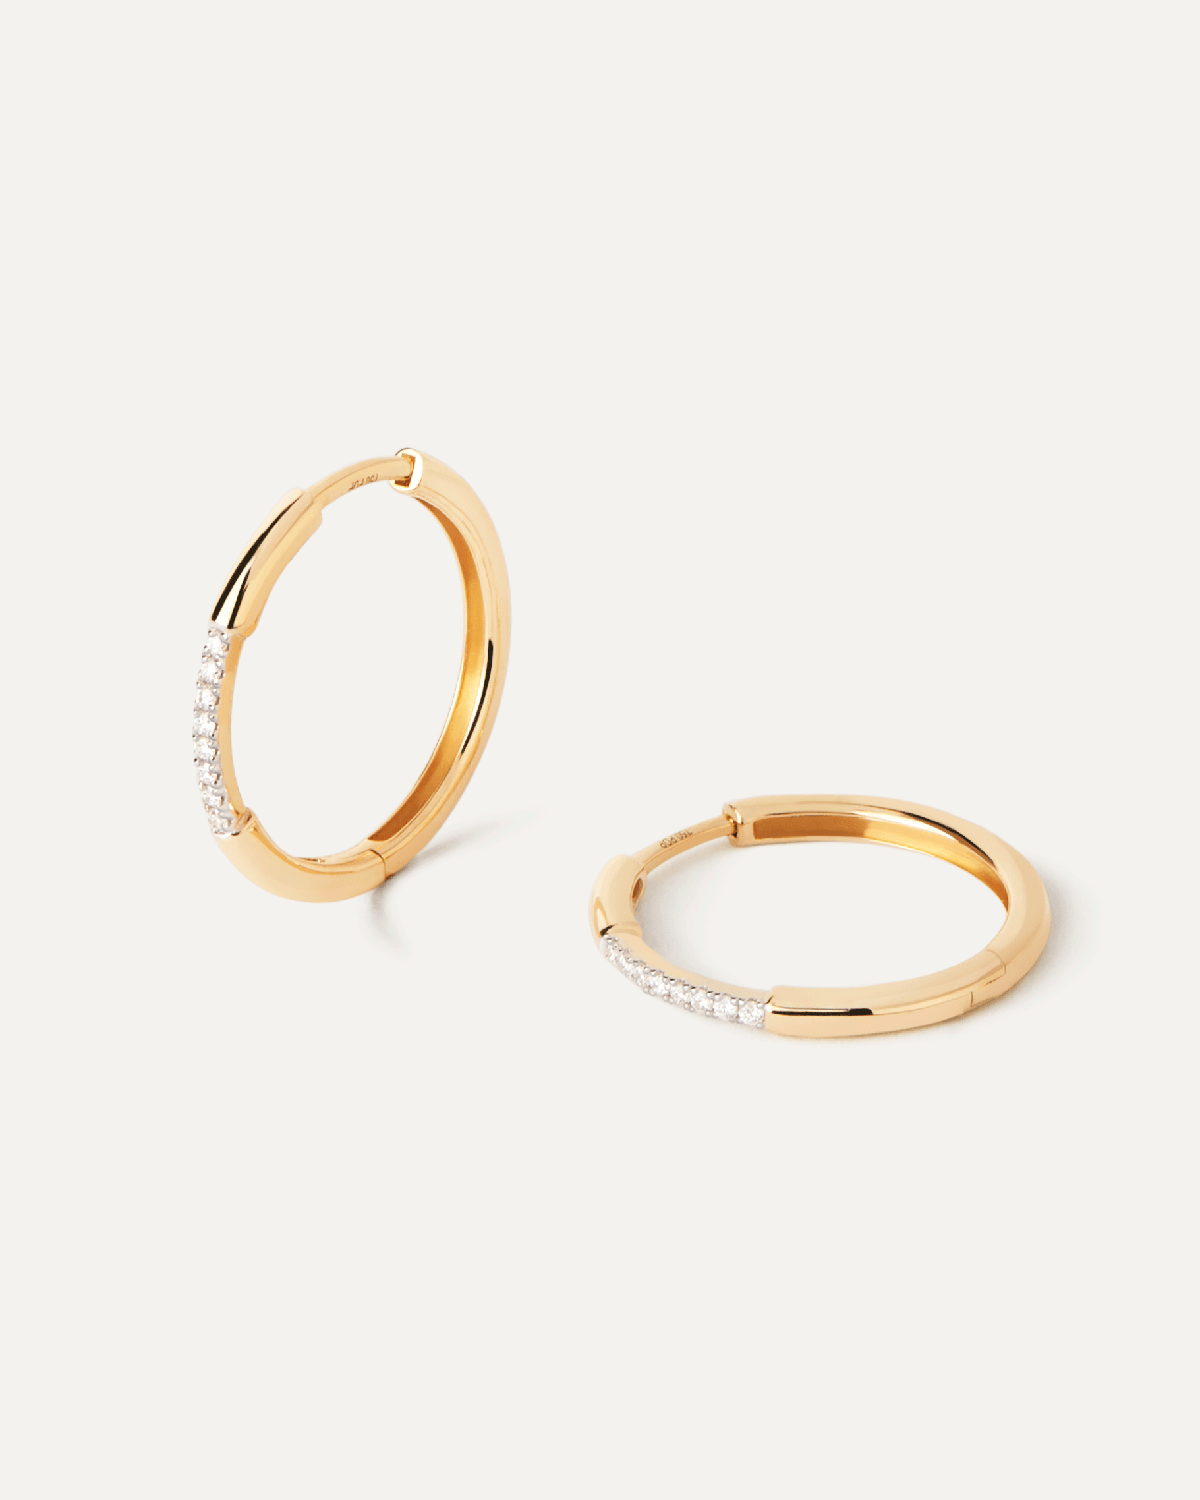 Diamonds and gold Nora hoops. Distinctive hoop earrings in solid yellow gold set with contrasting lab-grown diamonds . Get the latest arrival from PDPAOLA. Place your order safely and get this Best Seller.